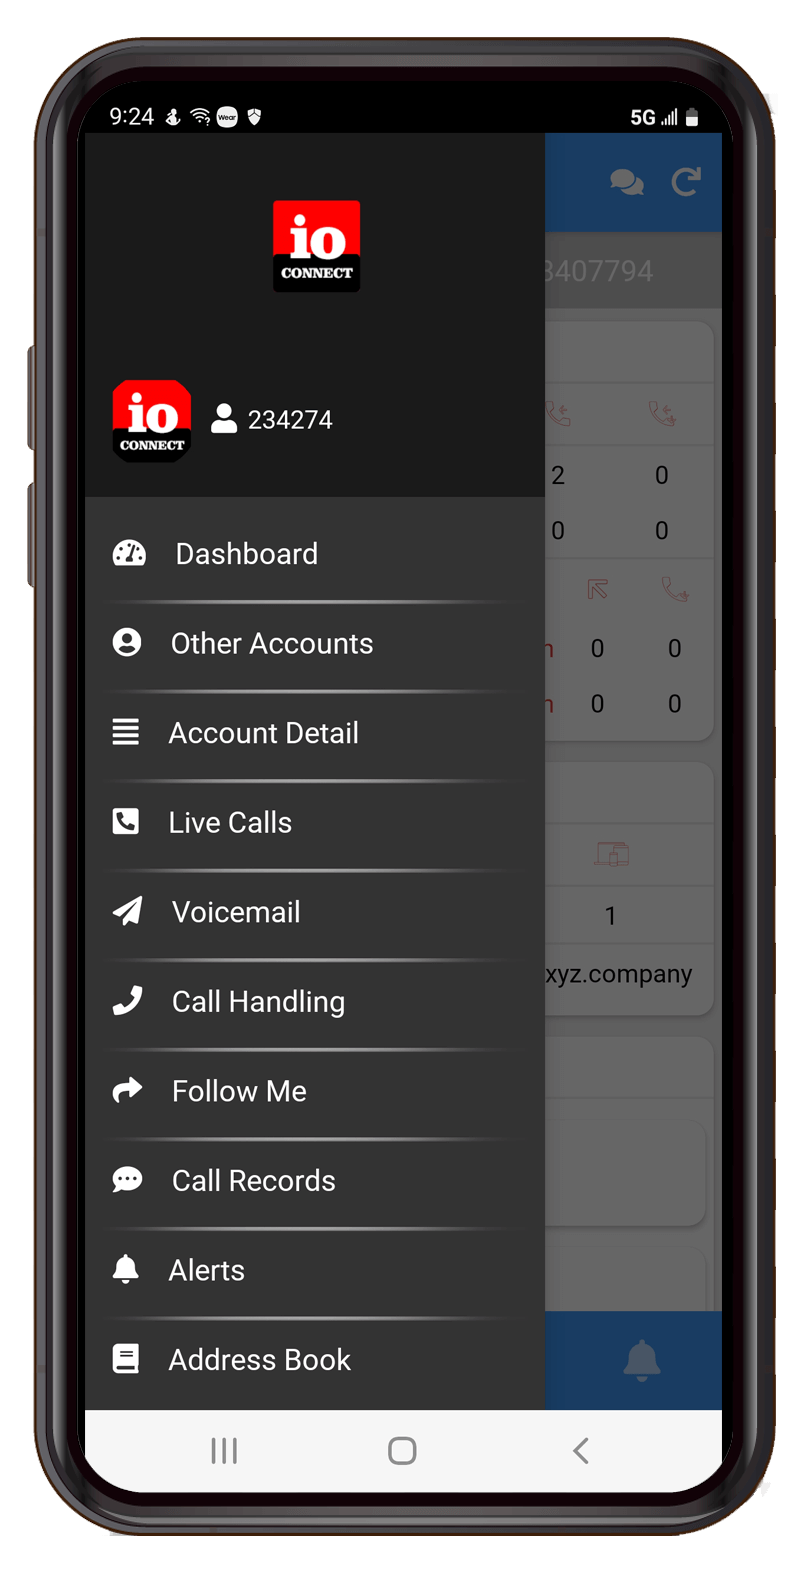 ioconnect mobile view - account management